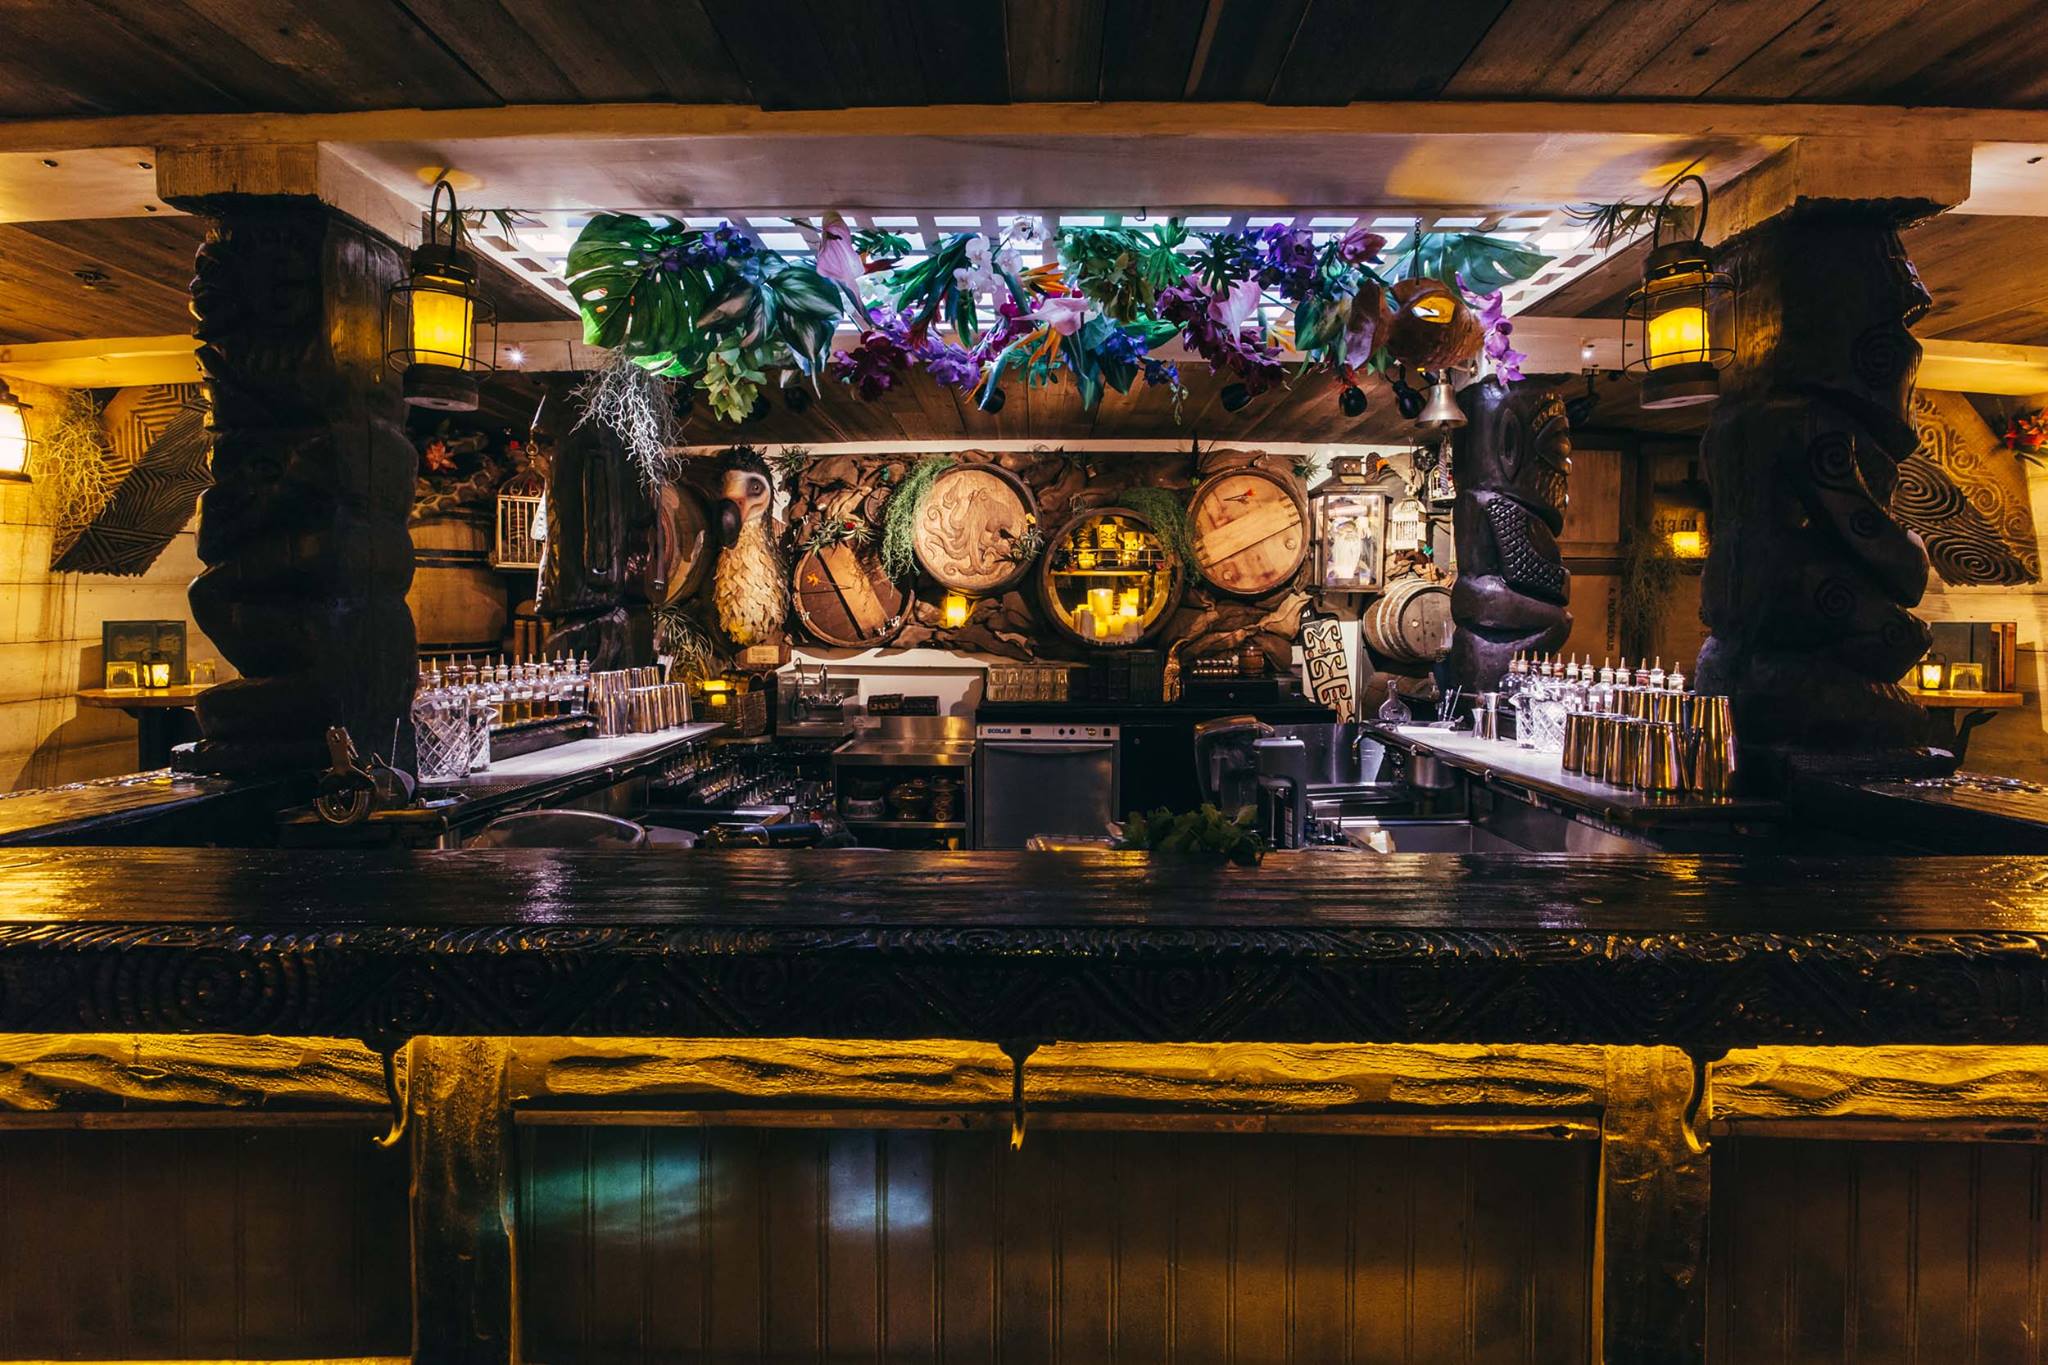 The bar at Undertow, with plants hanging from the ceiling and barrel designs in the background.